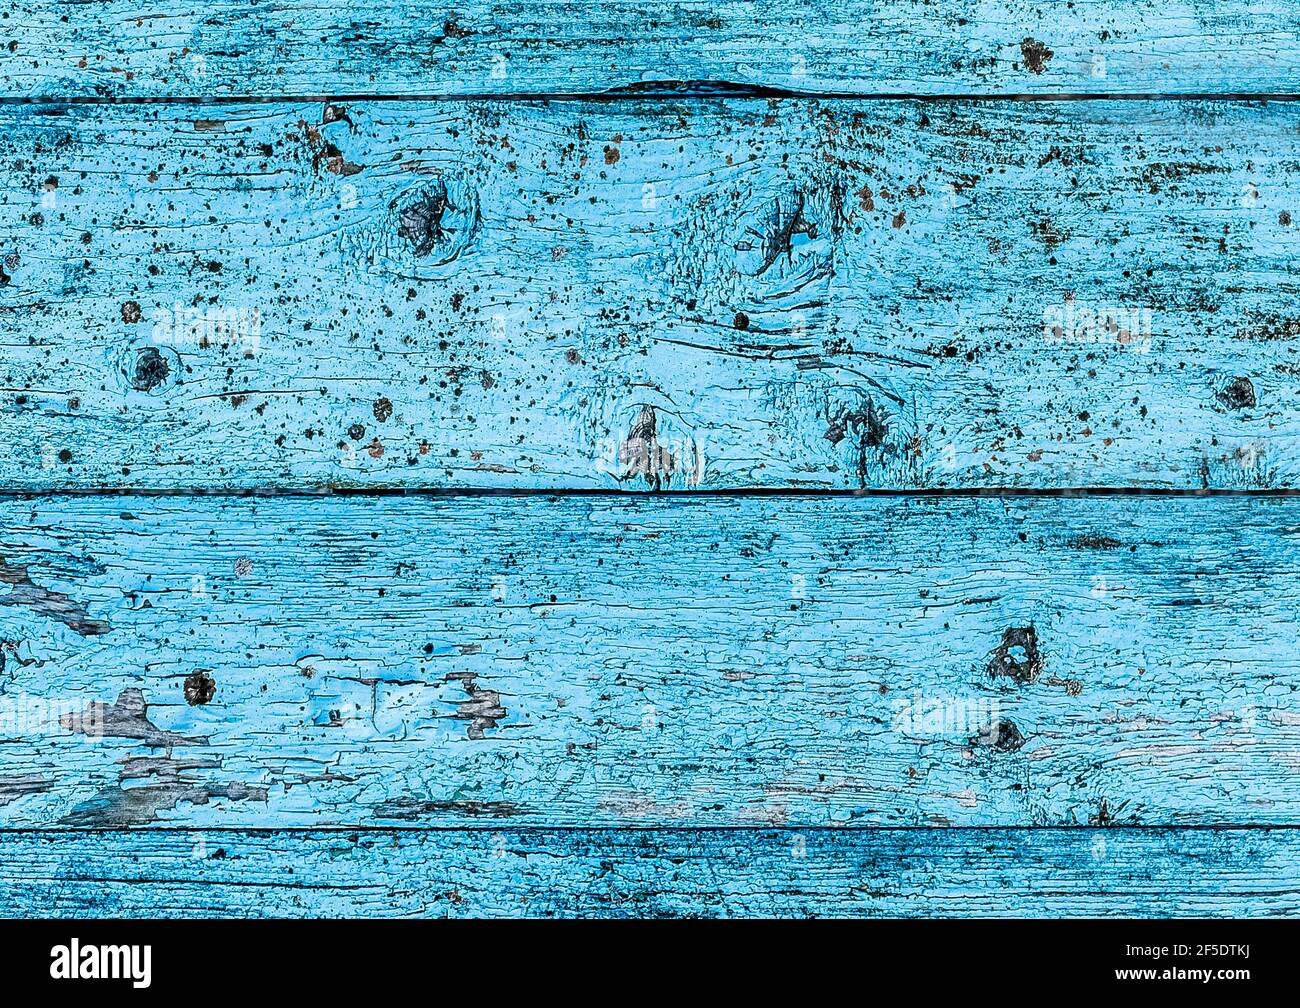 Texture of old wooden fence with blue peeling paint, abstract plank background. Stock Photo